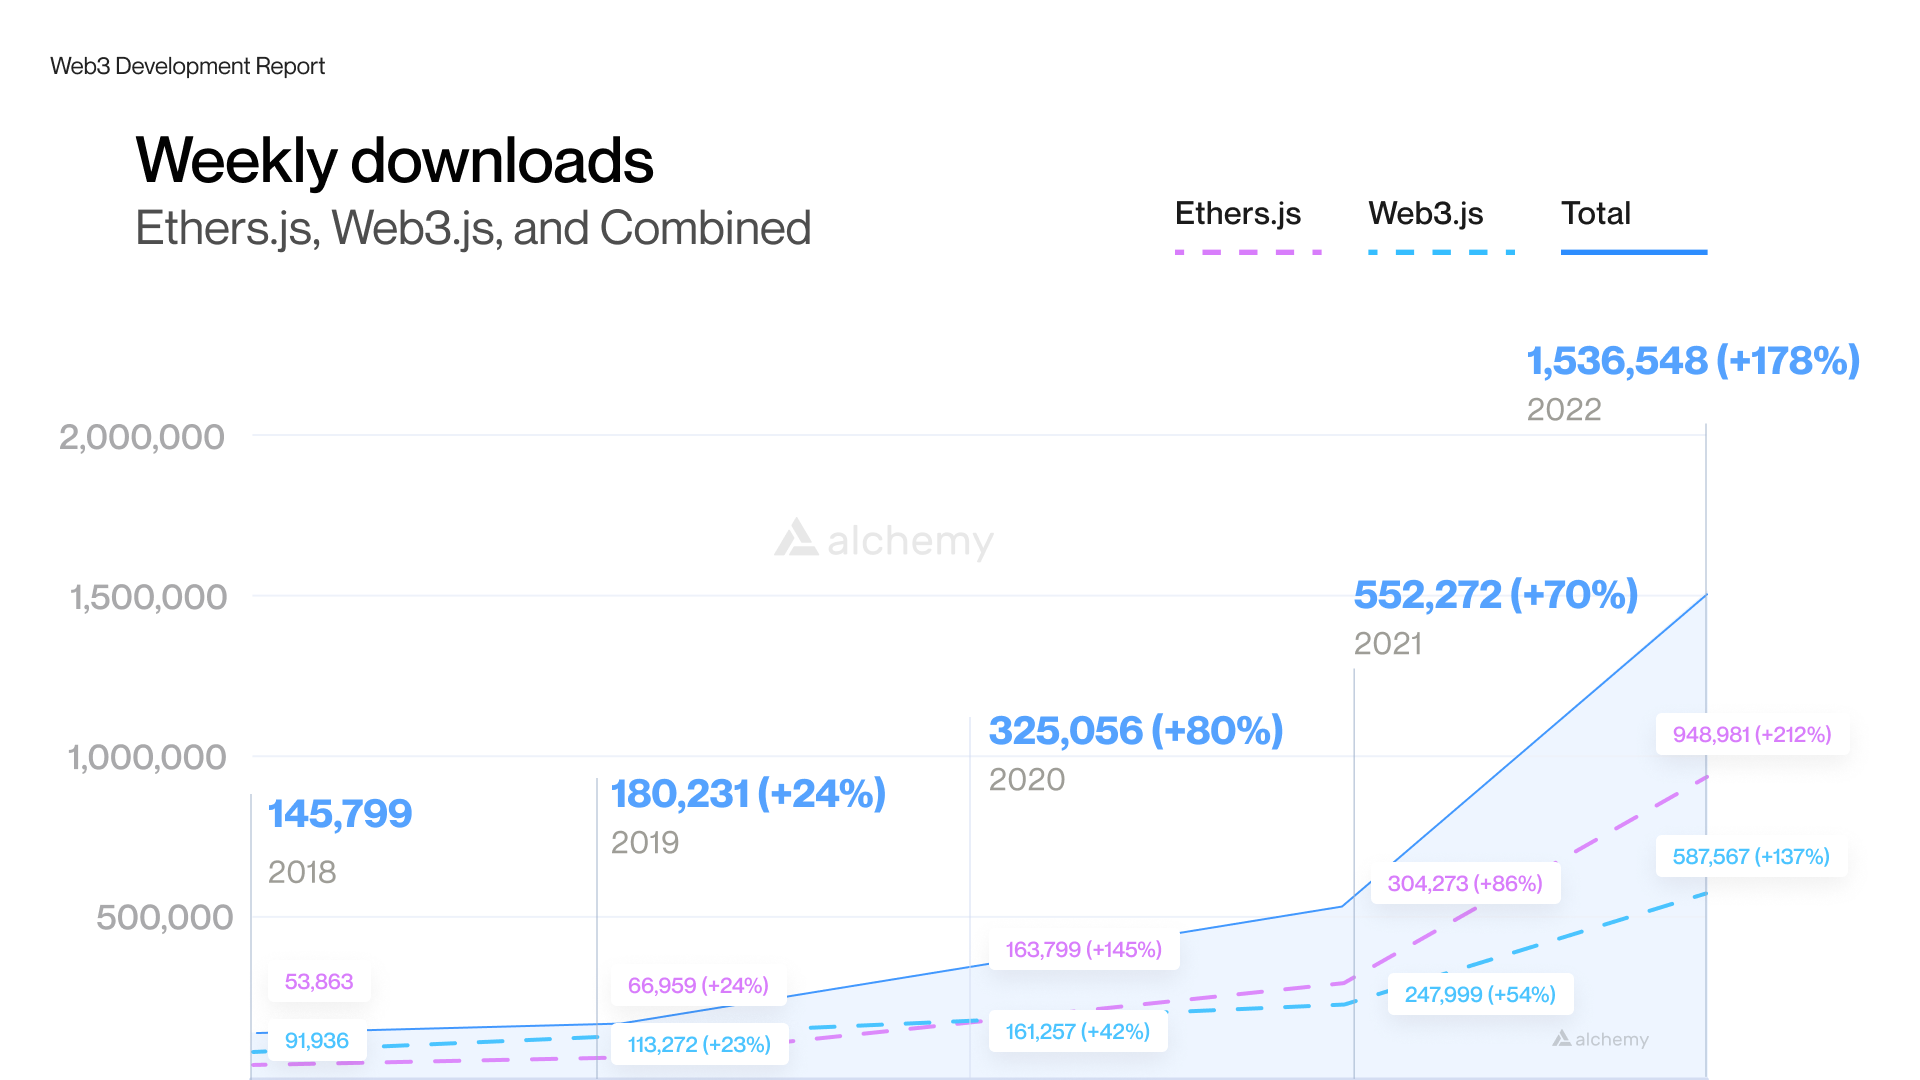 Weekly downloads of ethers.js and web3.js since 2018.